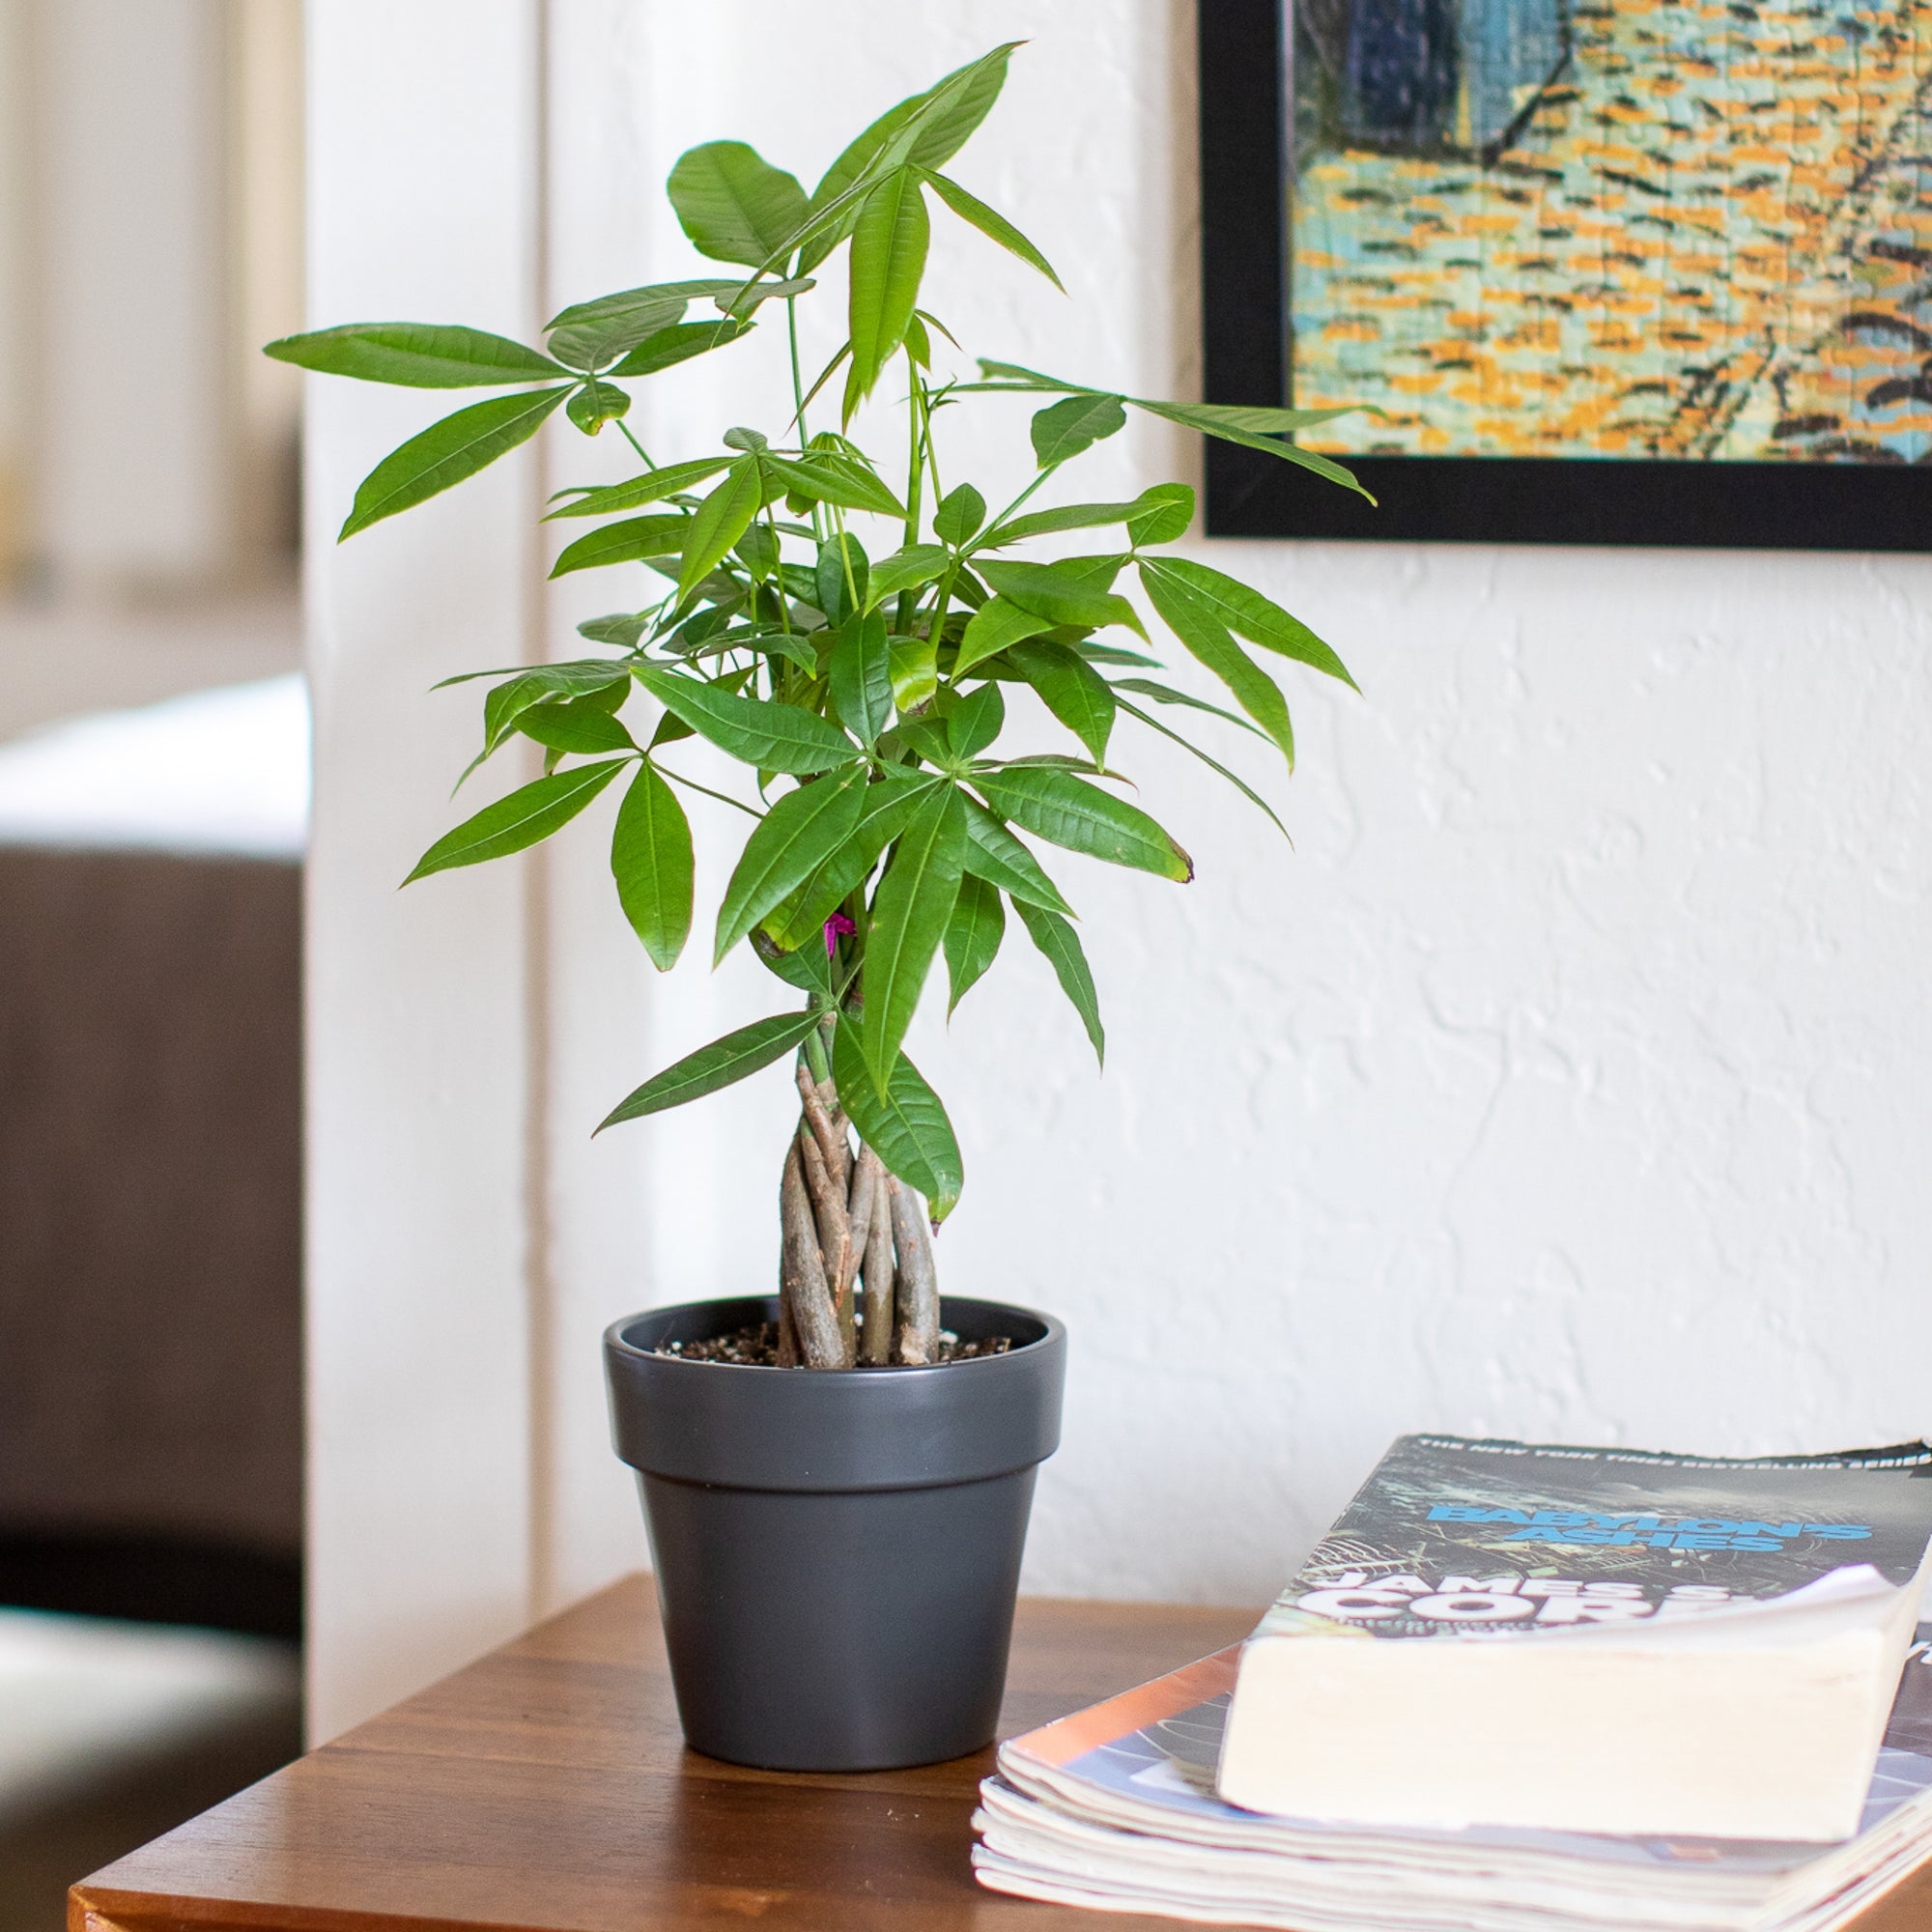 Sustainable Gifting: Give a Money Tree this Holiday